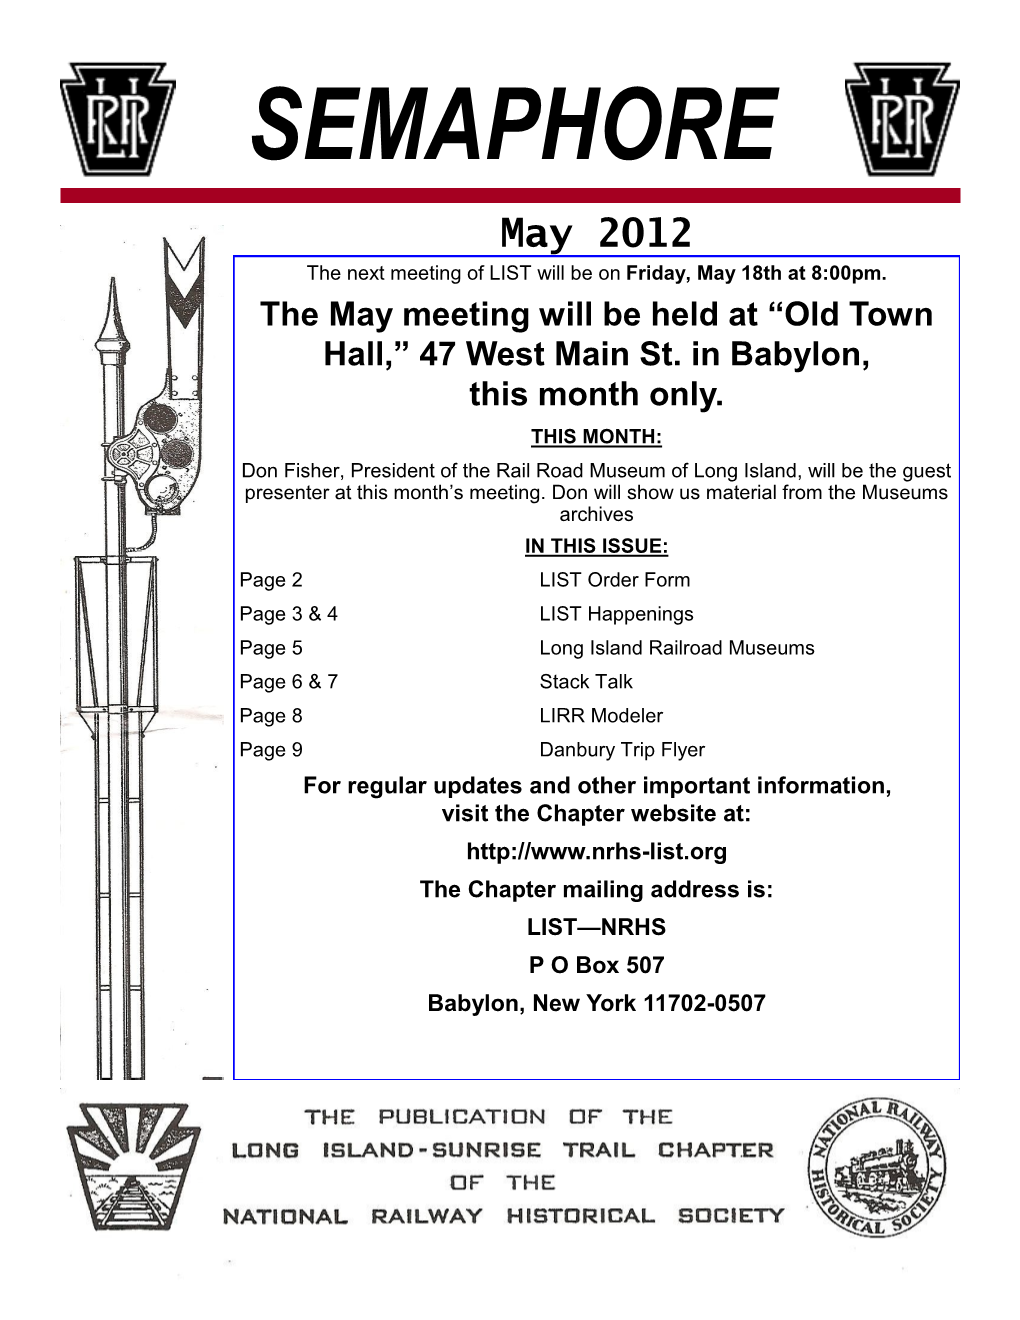 SEMAPHORE May 2012 the Next Meeting of LIST Will Be on Friday, May 18Th at 8:00Pm